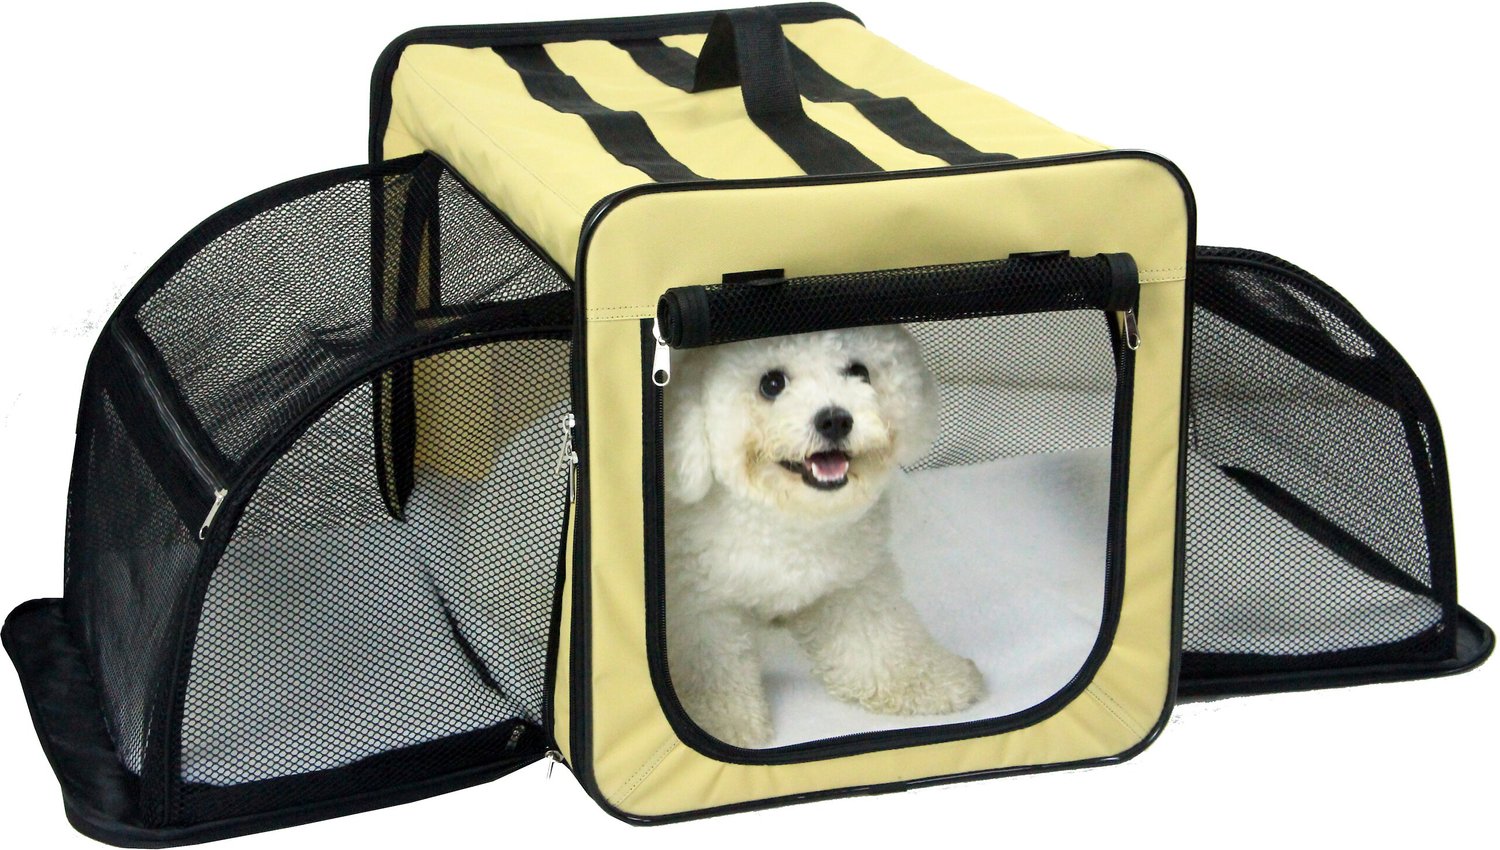 expandable crate